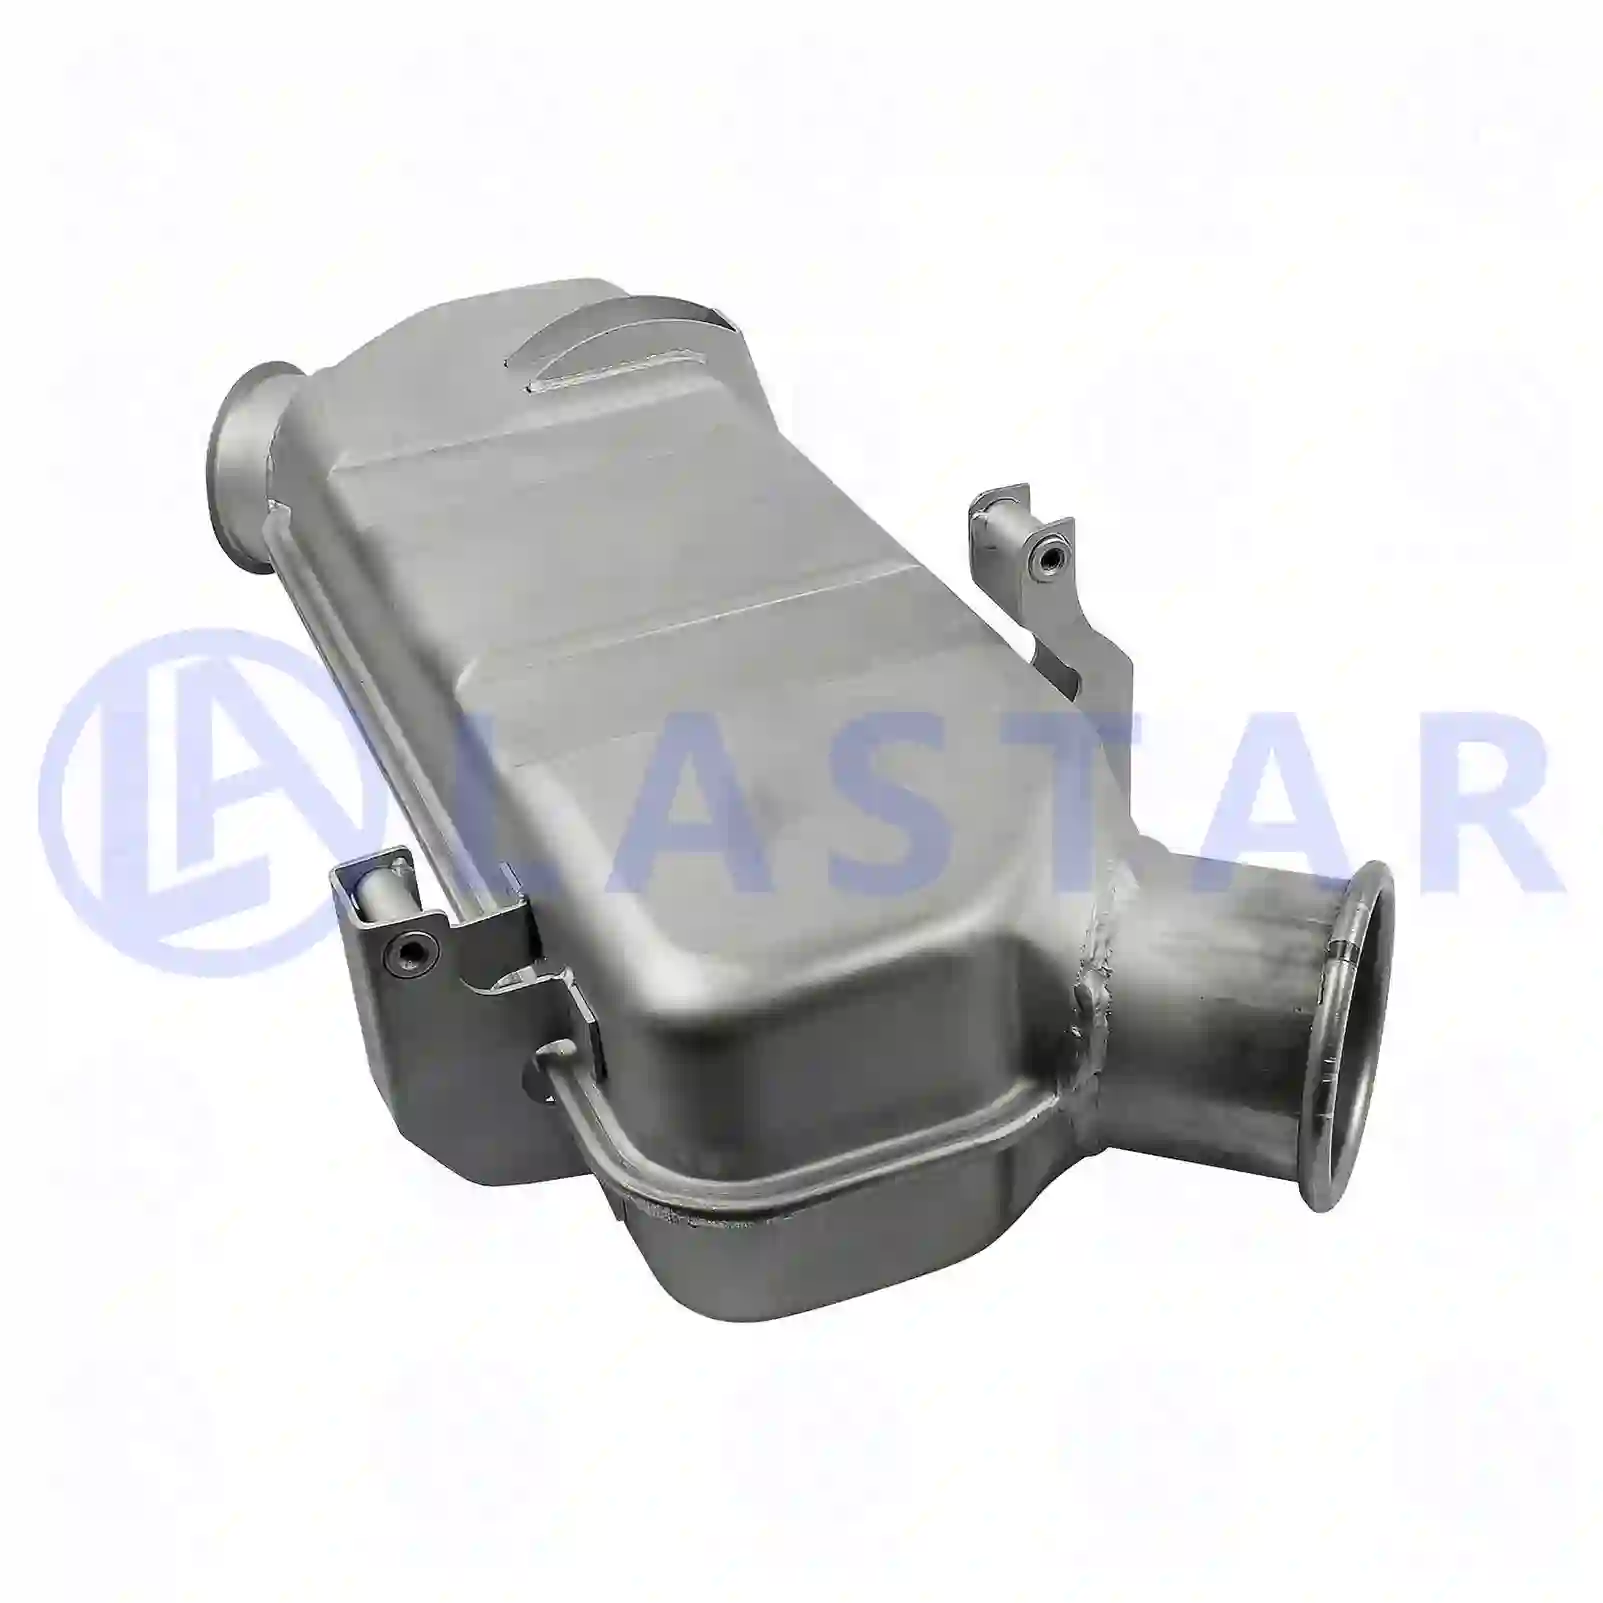 Silencer, old version, 77706994, 1548560, 1852049 ||  77706994 Lastar Spare Part | Truck Spare Parts, Auotomotive Spare Parts Silencer, old version, 77706994, 1548560, 1852049 ||  77706994 Lastar Spare Part | Truck Spare Parts, Auotomotive Spare Parts